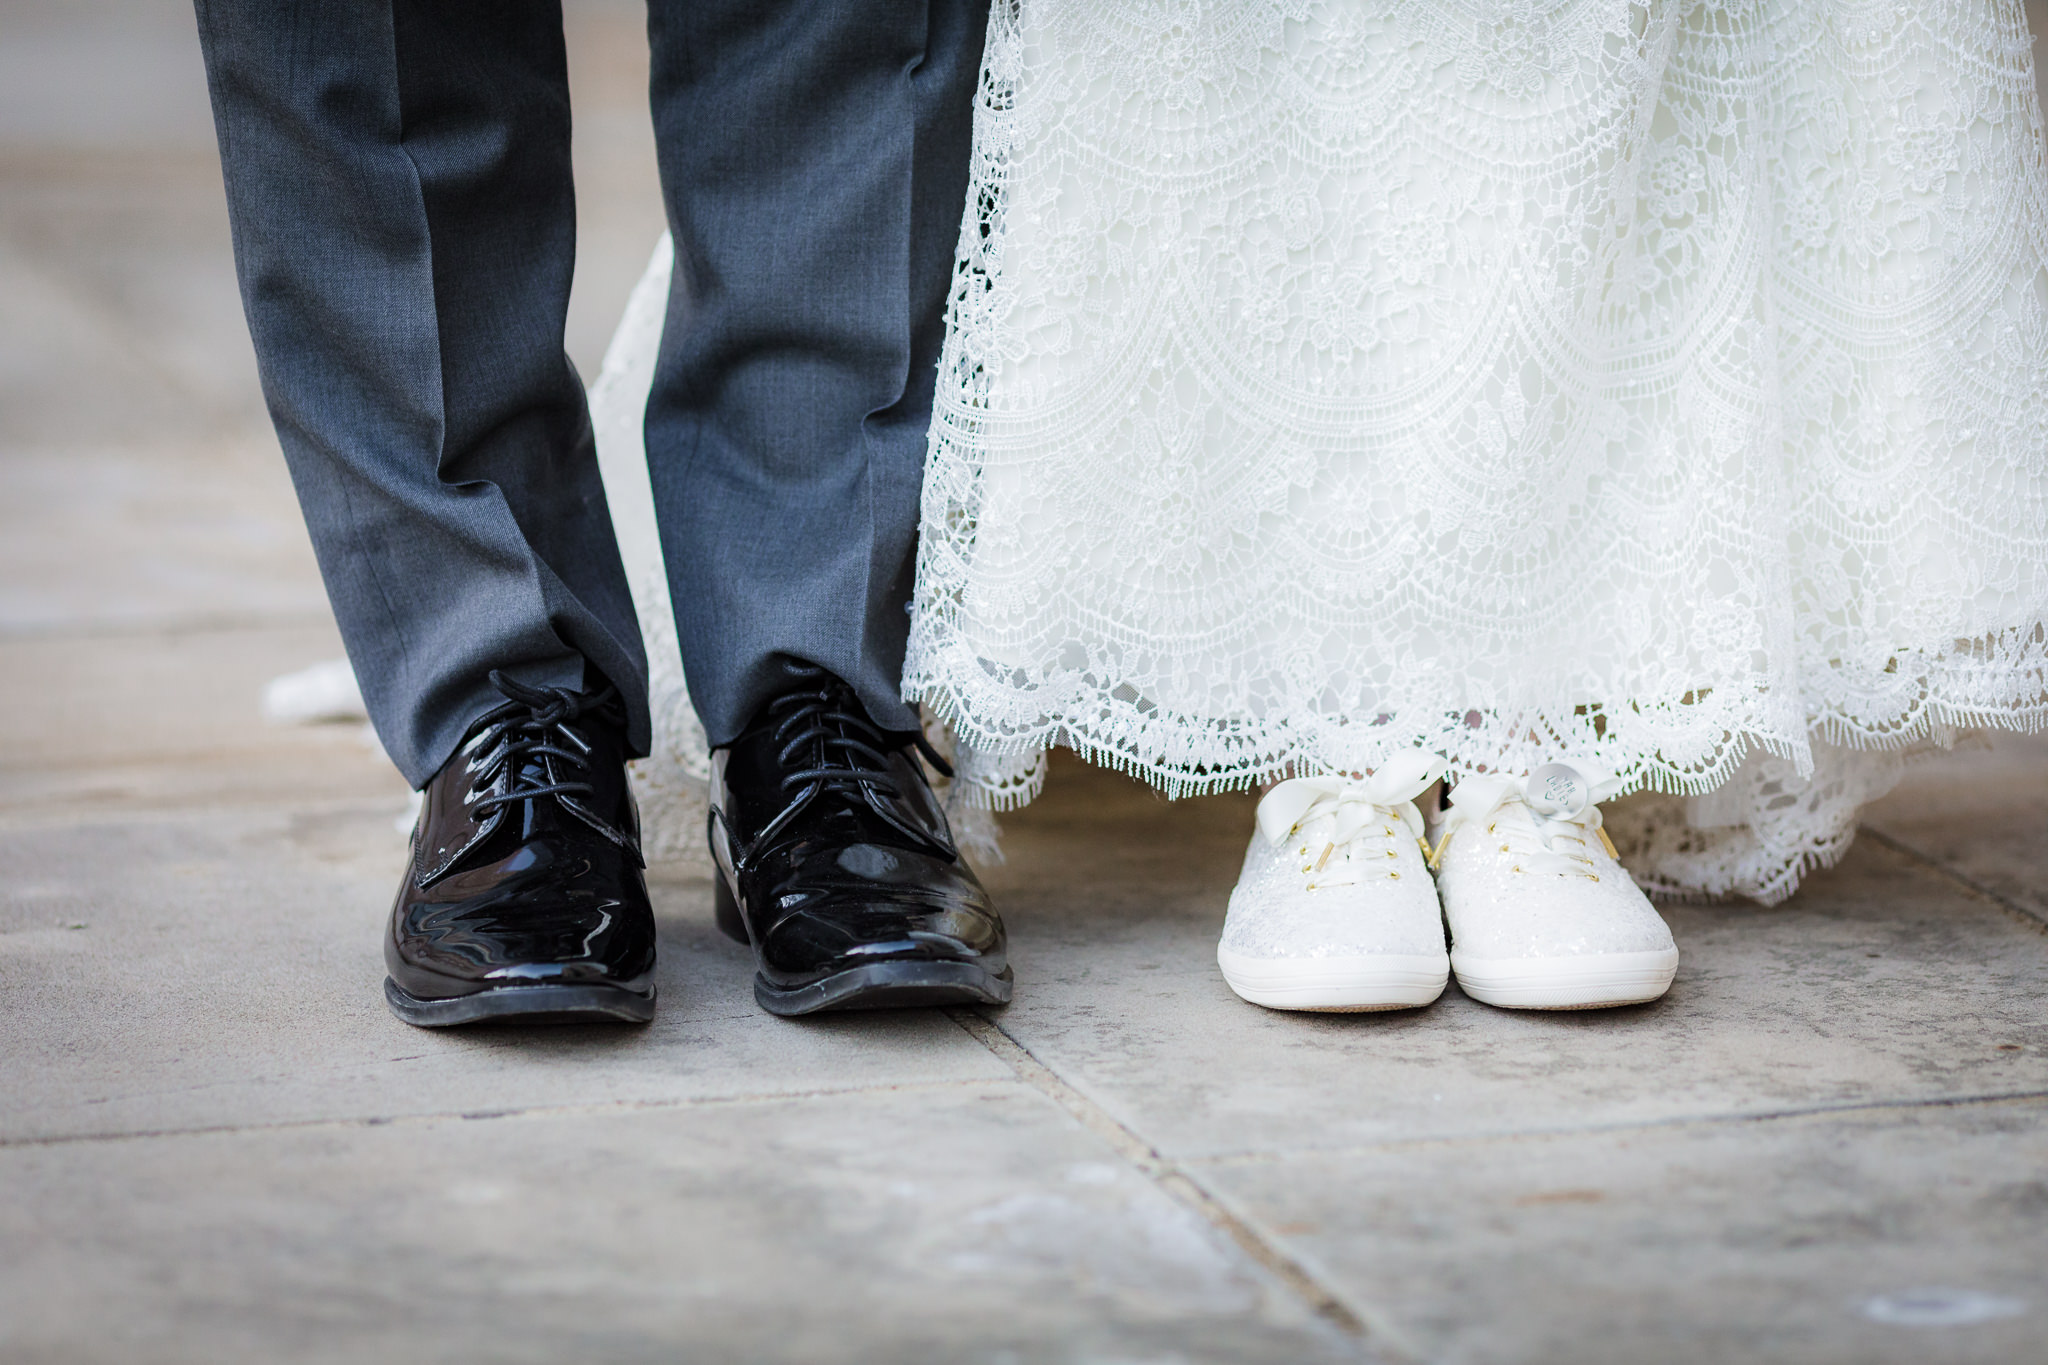 Bride & groom's shoes; white sequence Kate Spade shoes